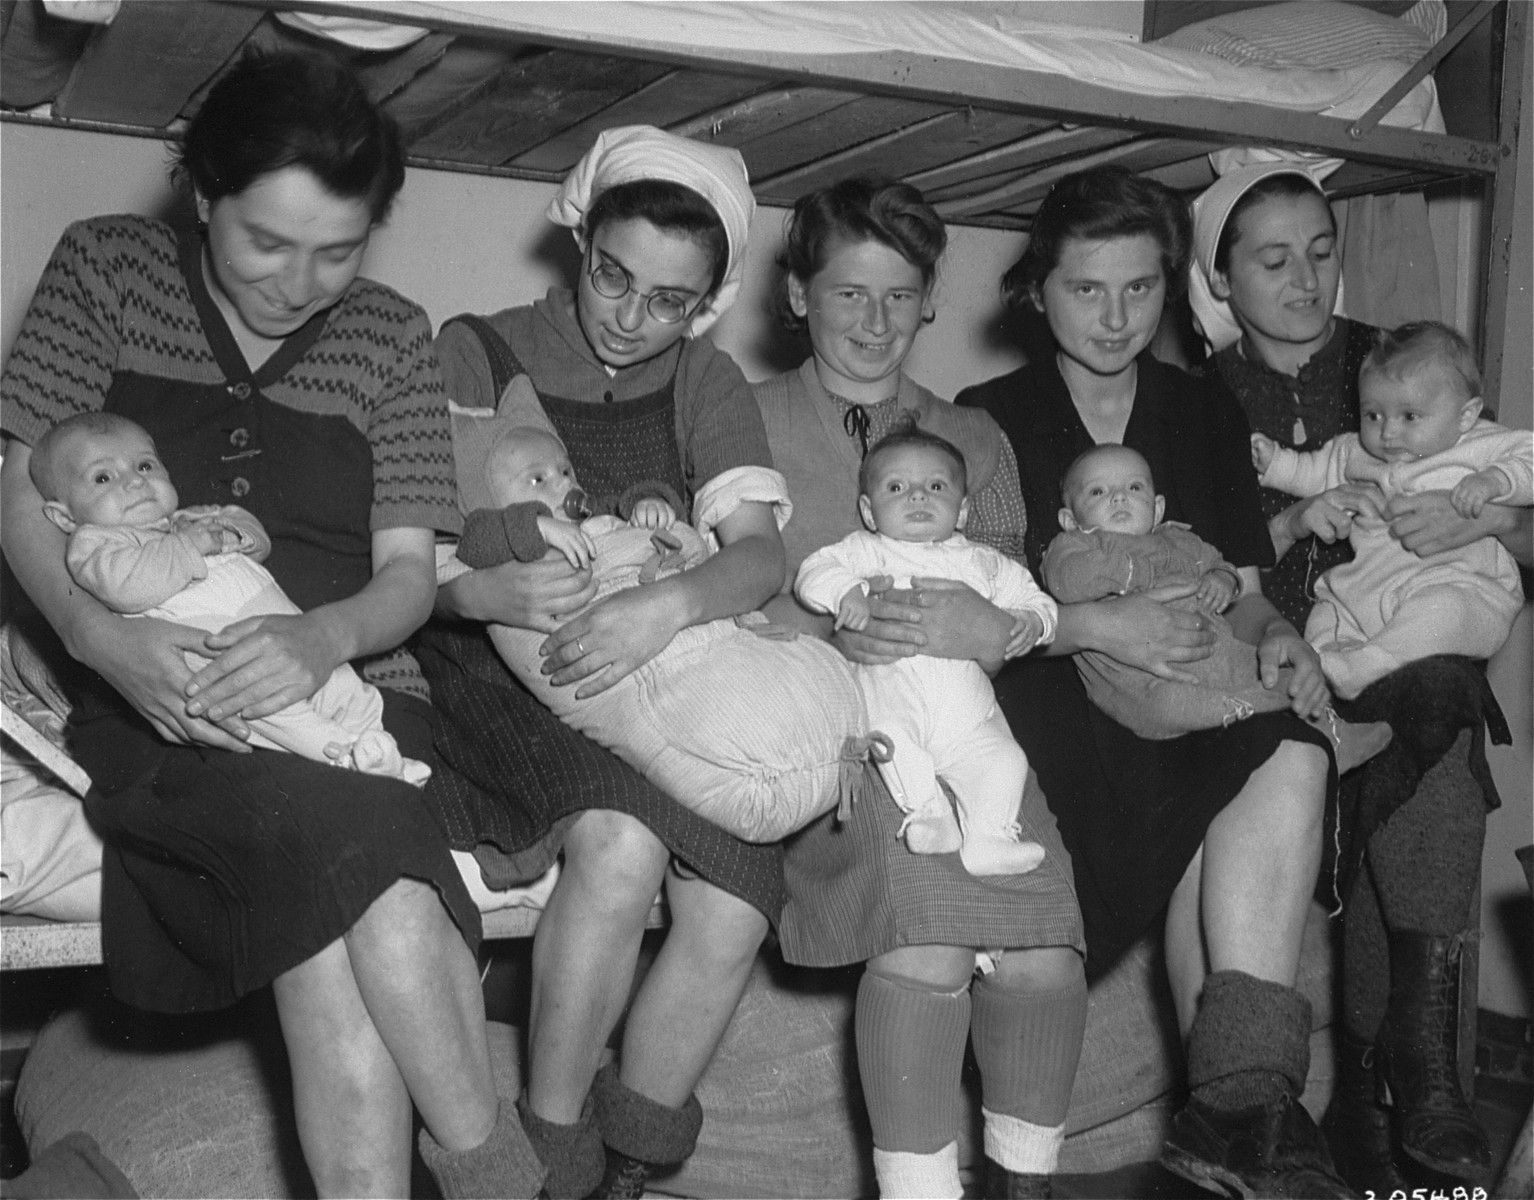 Group portrait of five Hungarian Jewish mothers and their infants in a Dachau sub-camp in Germany.

Pictured from left to right are:  Ibolya Kovacs with her daughter Agnes; Suri Hirsch with her son Yossi; Eva Schwartz with her daughter Maria; Magda Fenyvesi with her daughter Judit; and Boeszi Legmann with her son Gyuri.  Not pictured are: Dora Loewy and her daughter Szuszi; and Miriam Schwarcz Rosenthal and her son Laci (Leslie).